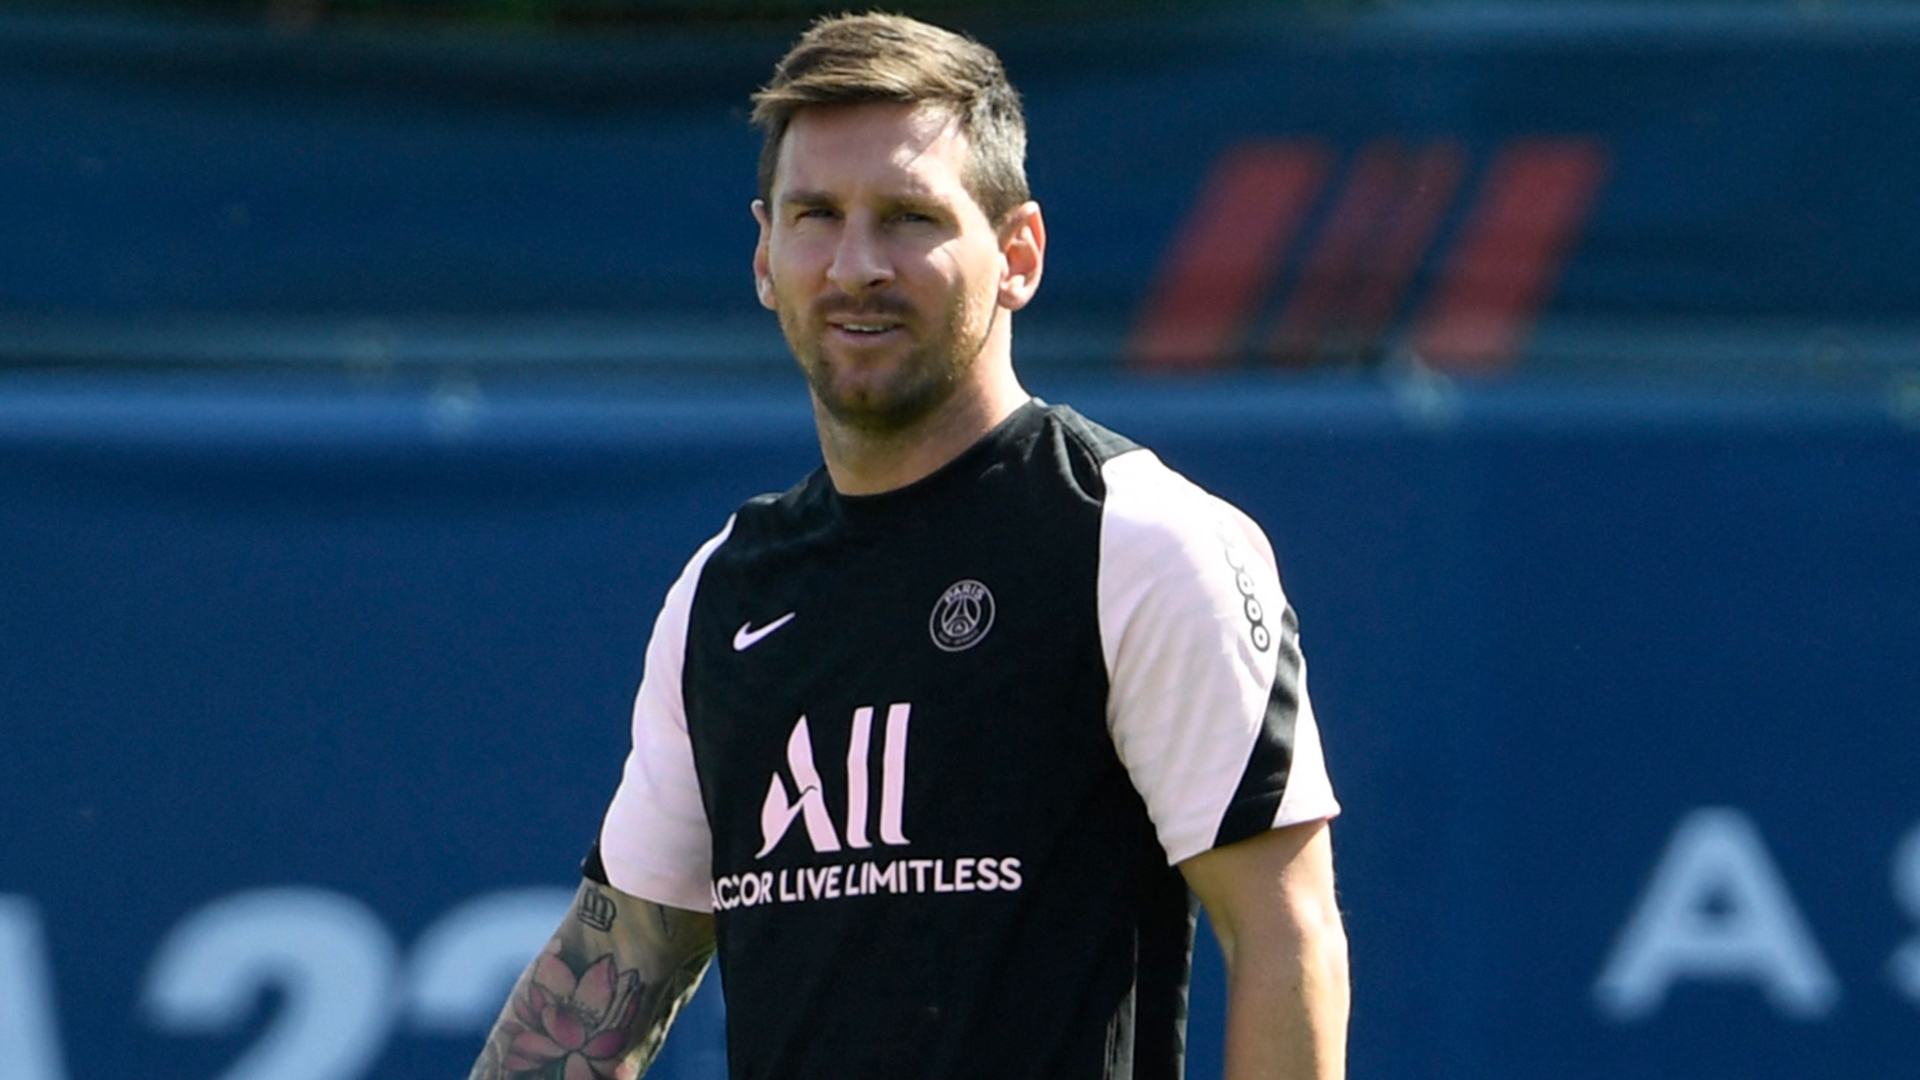 ‘We didn’t have the slightest chance’ – Simeone insists Atletico did not make Messi approach